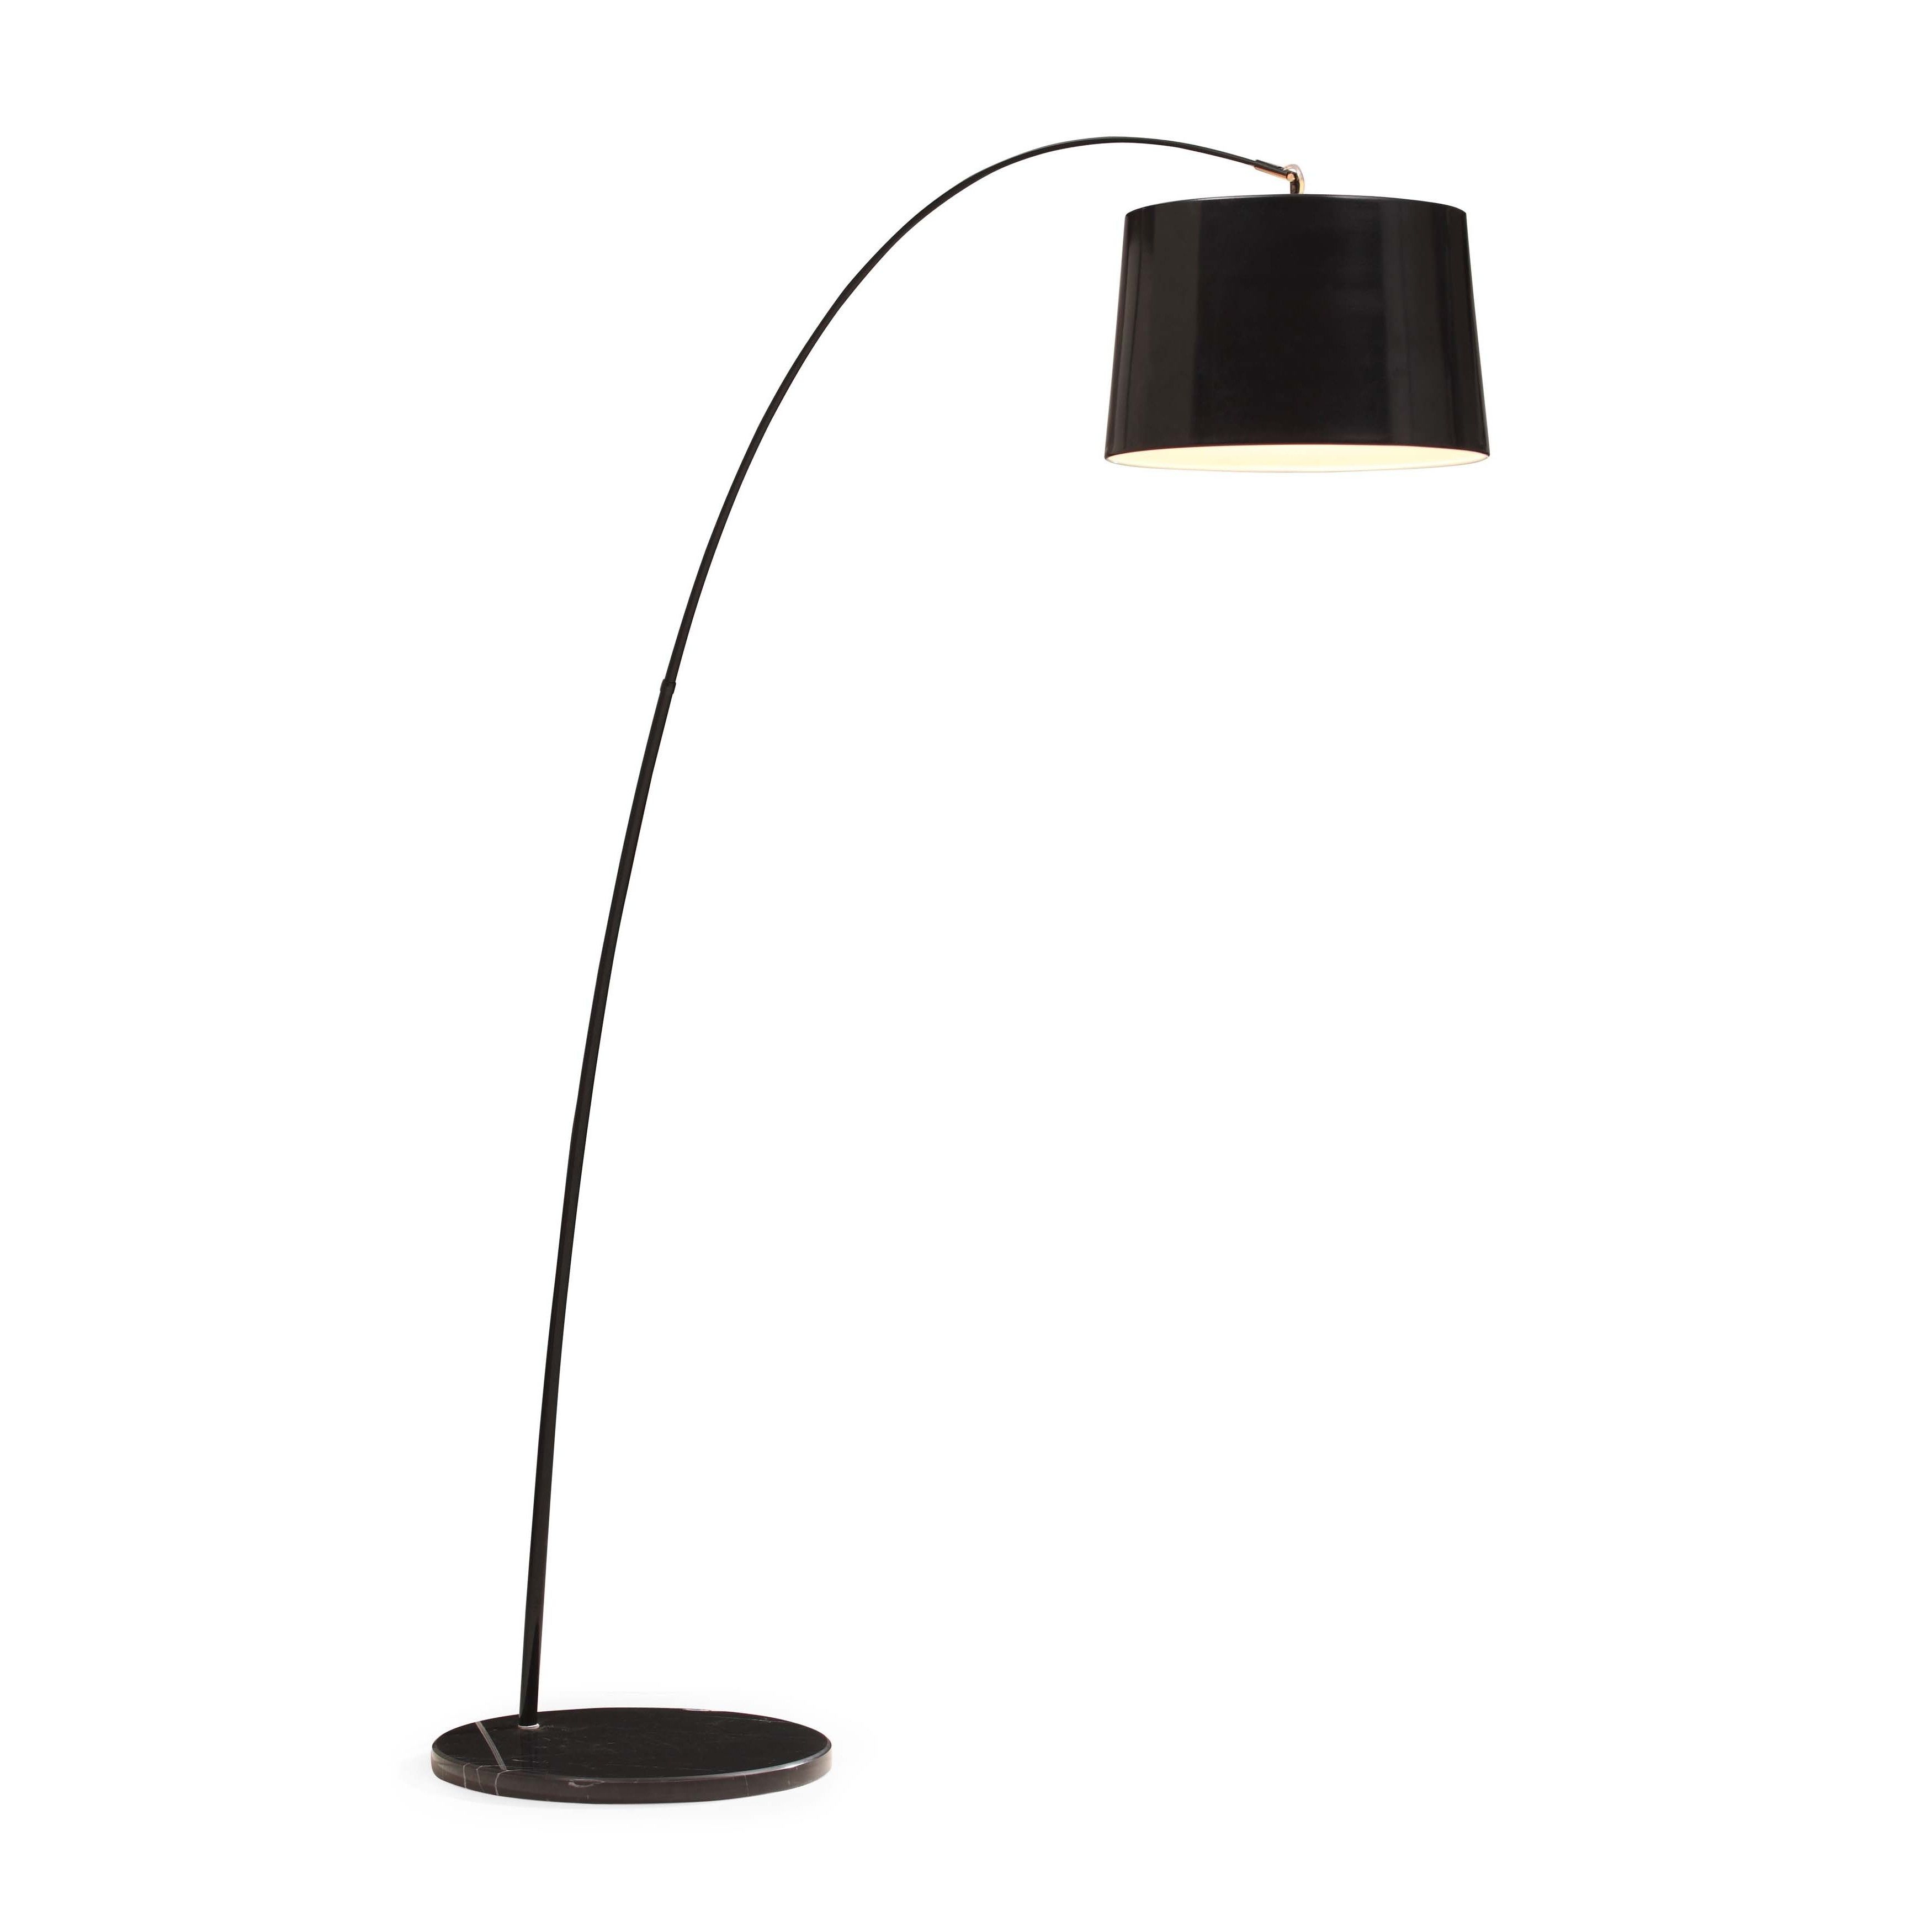 Zuo Twisty Floor Lamp Products Home Office Accessories intended for size 3500 X 3500